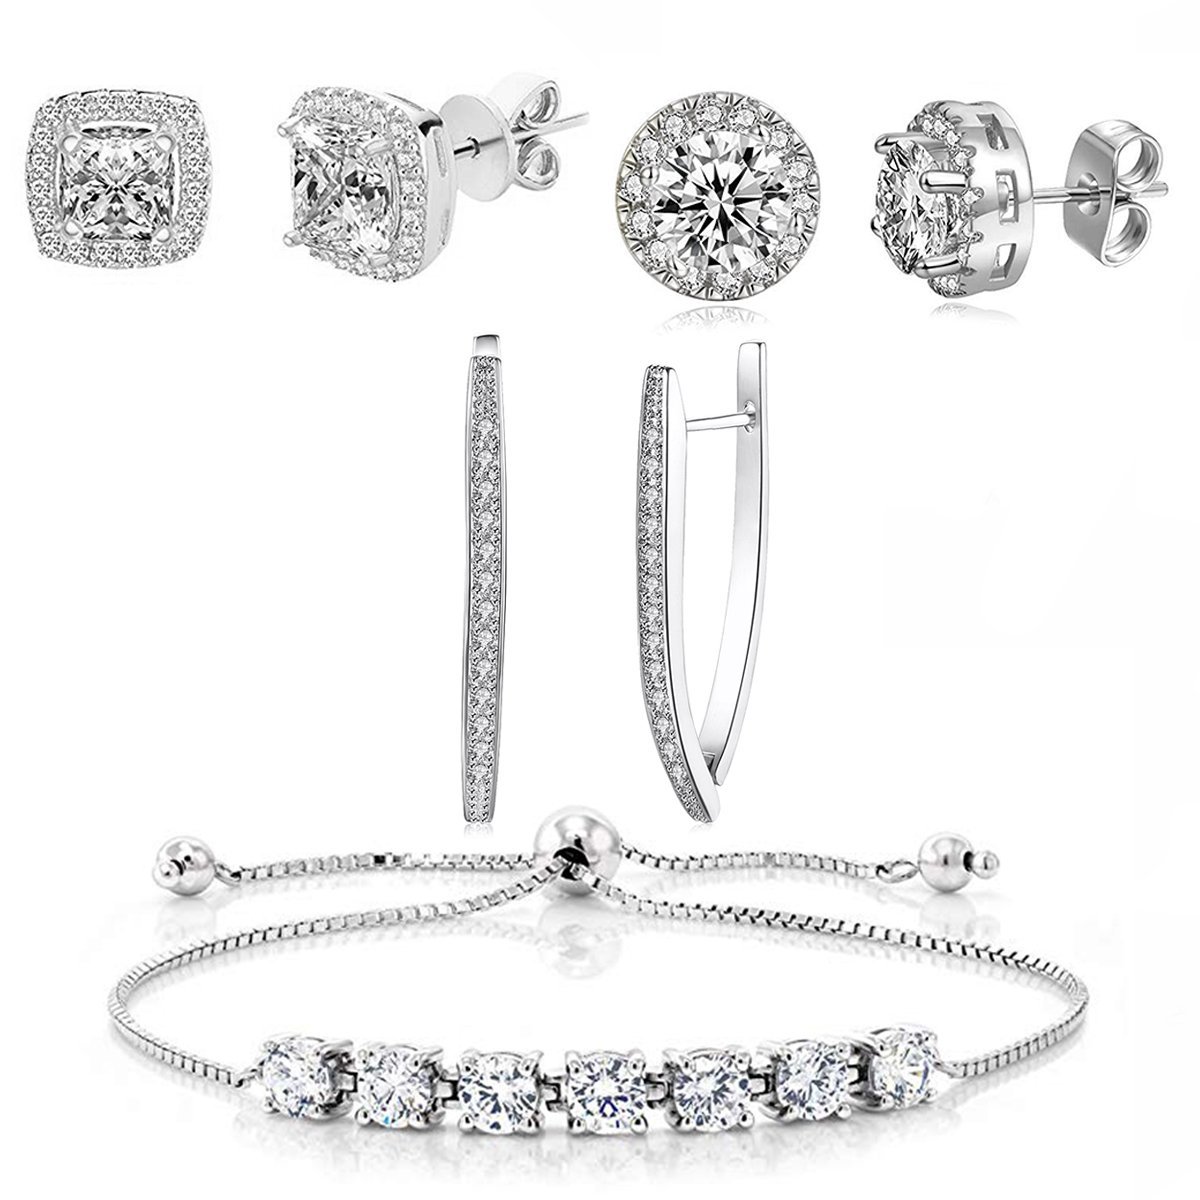 Picture of Alily Jewelry AustrianBUNDLE-SILVER-GBOX Halo Earrings Hoop & Bracelet Set with Gift Box&#44; Silver - 4 Piece